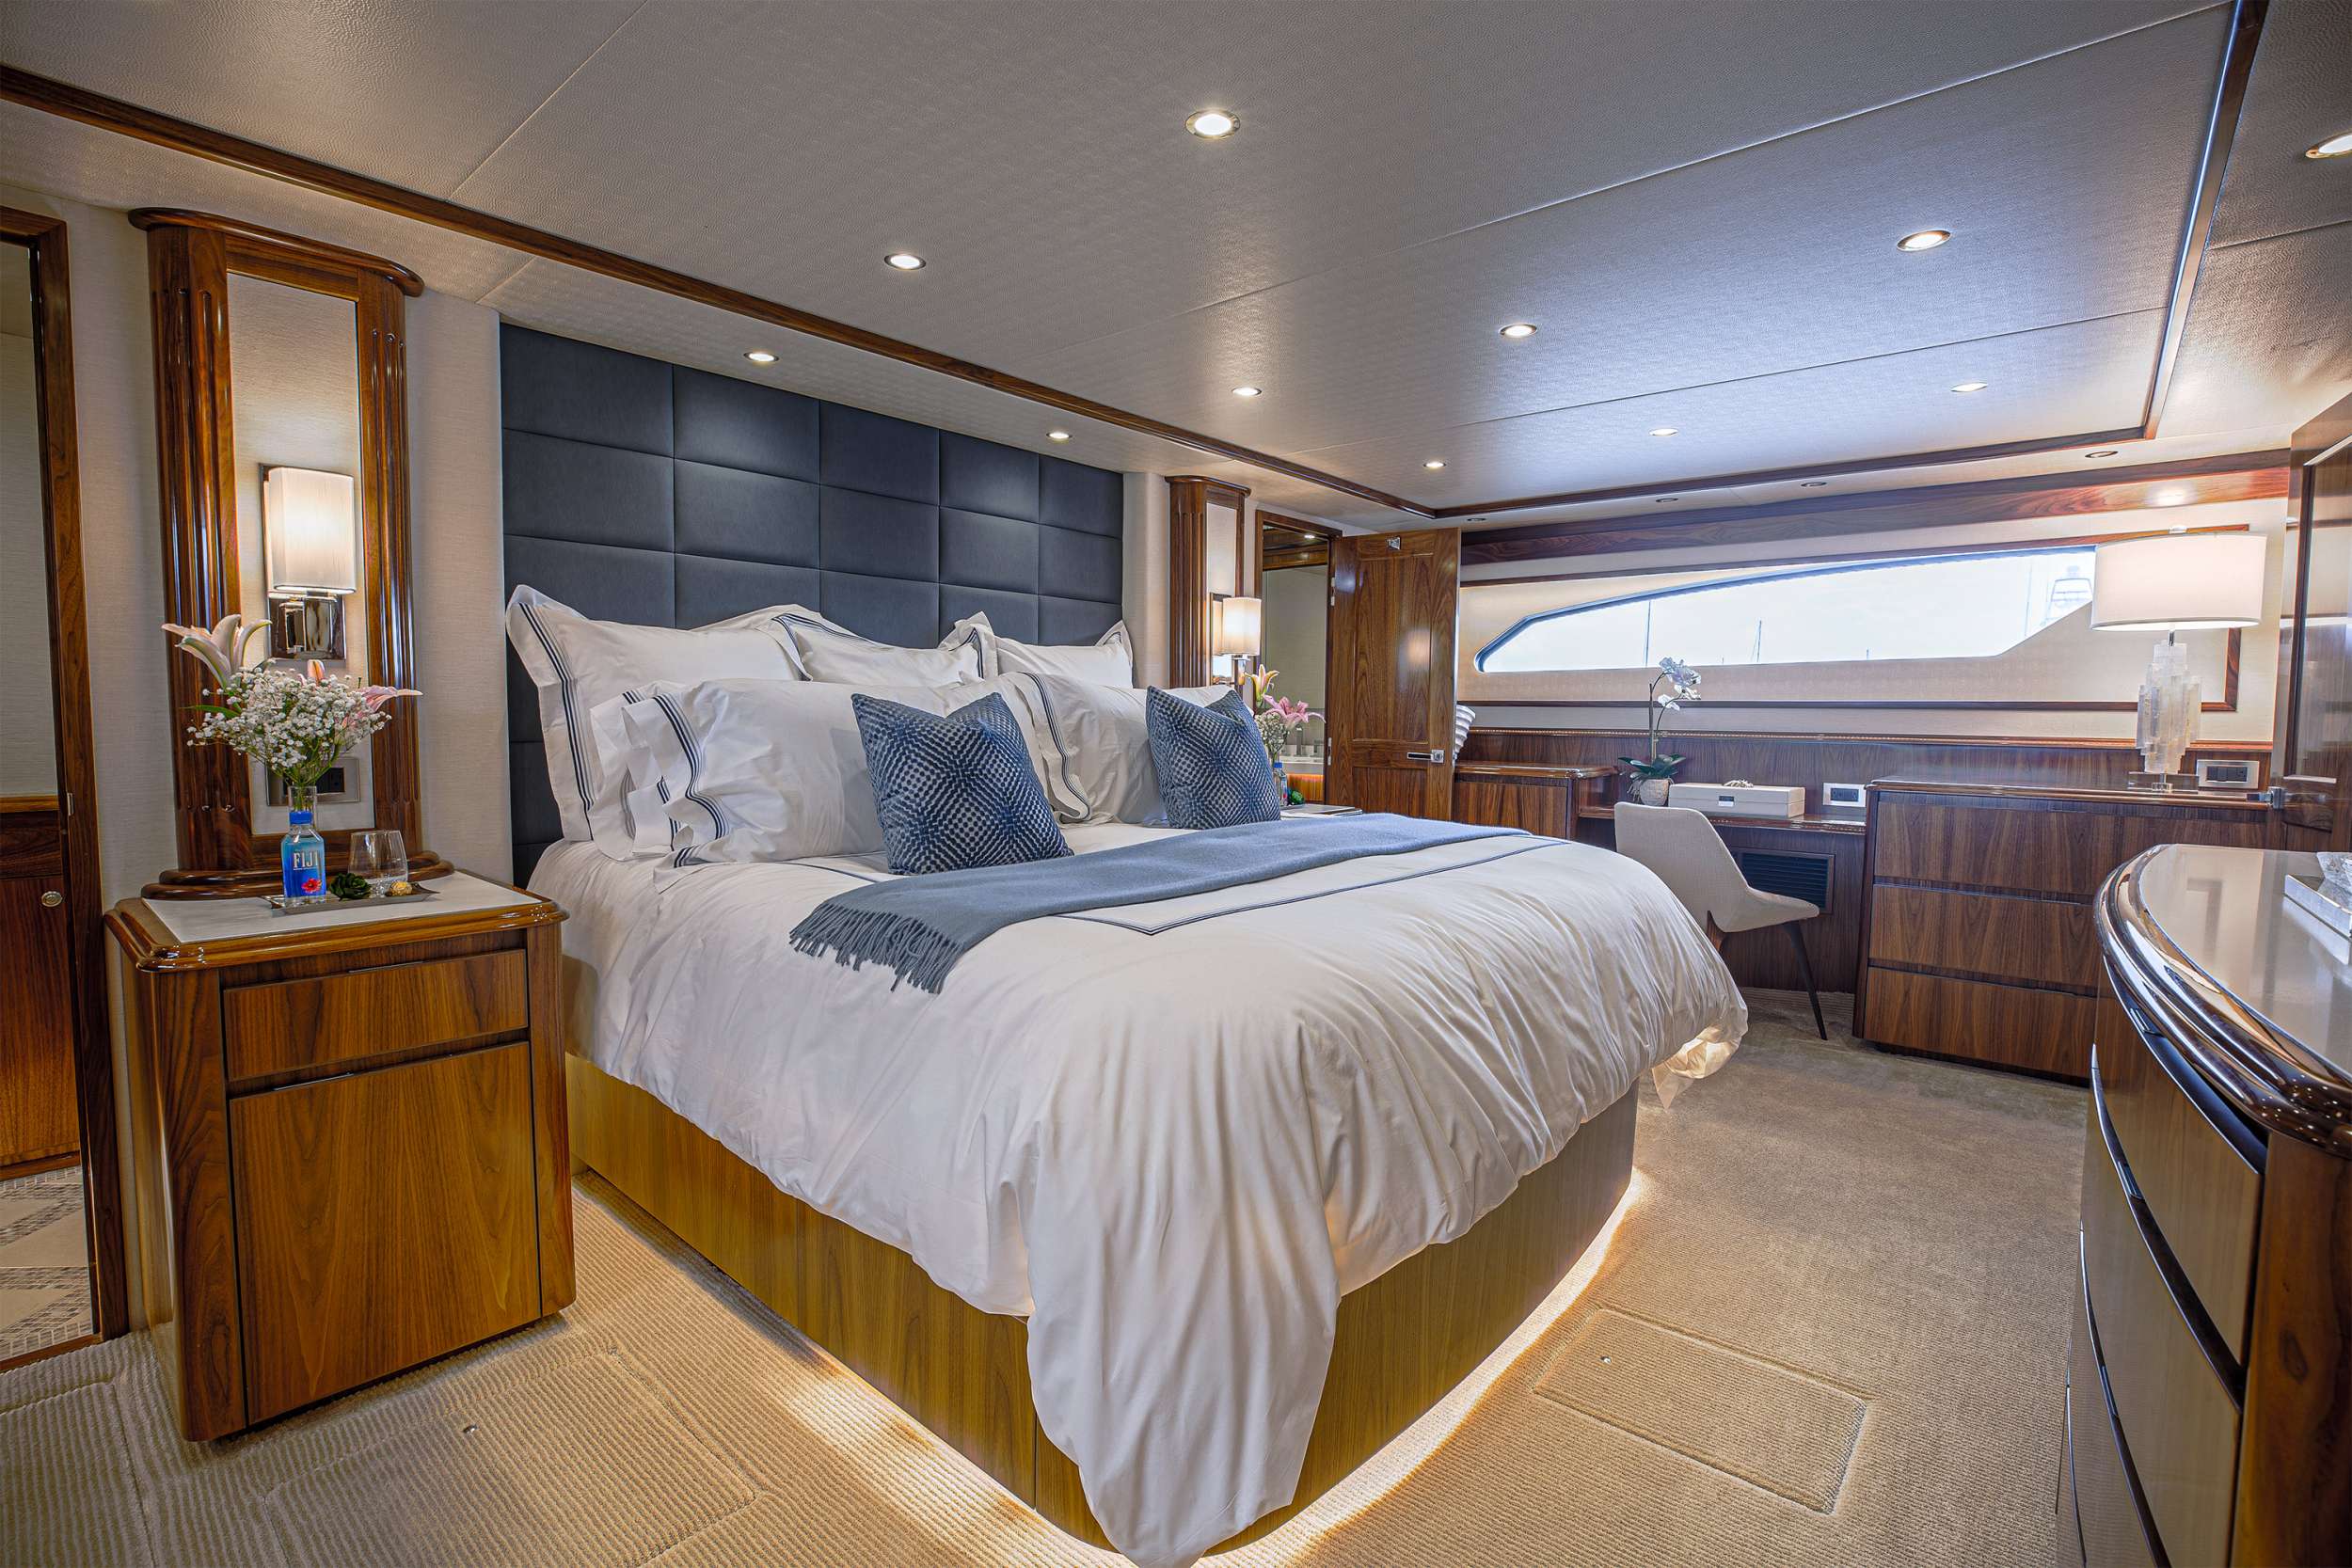 SPECULATOR 92 Yacht Charter - Master King Stateroom